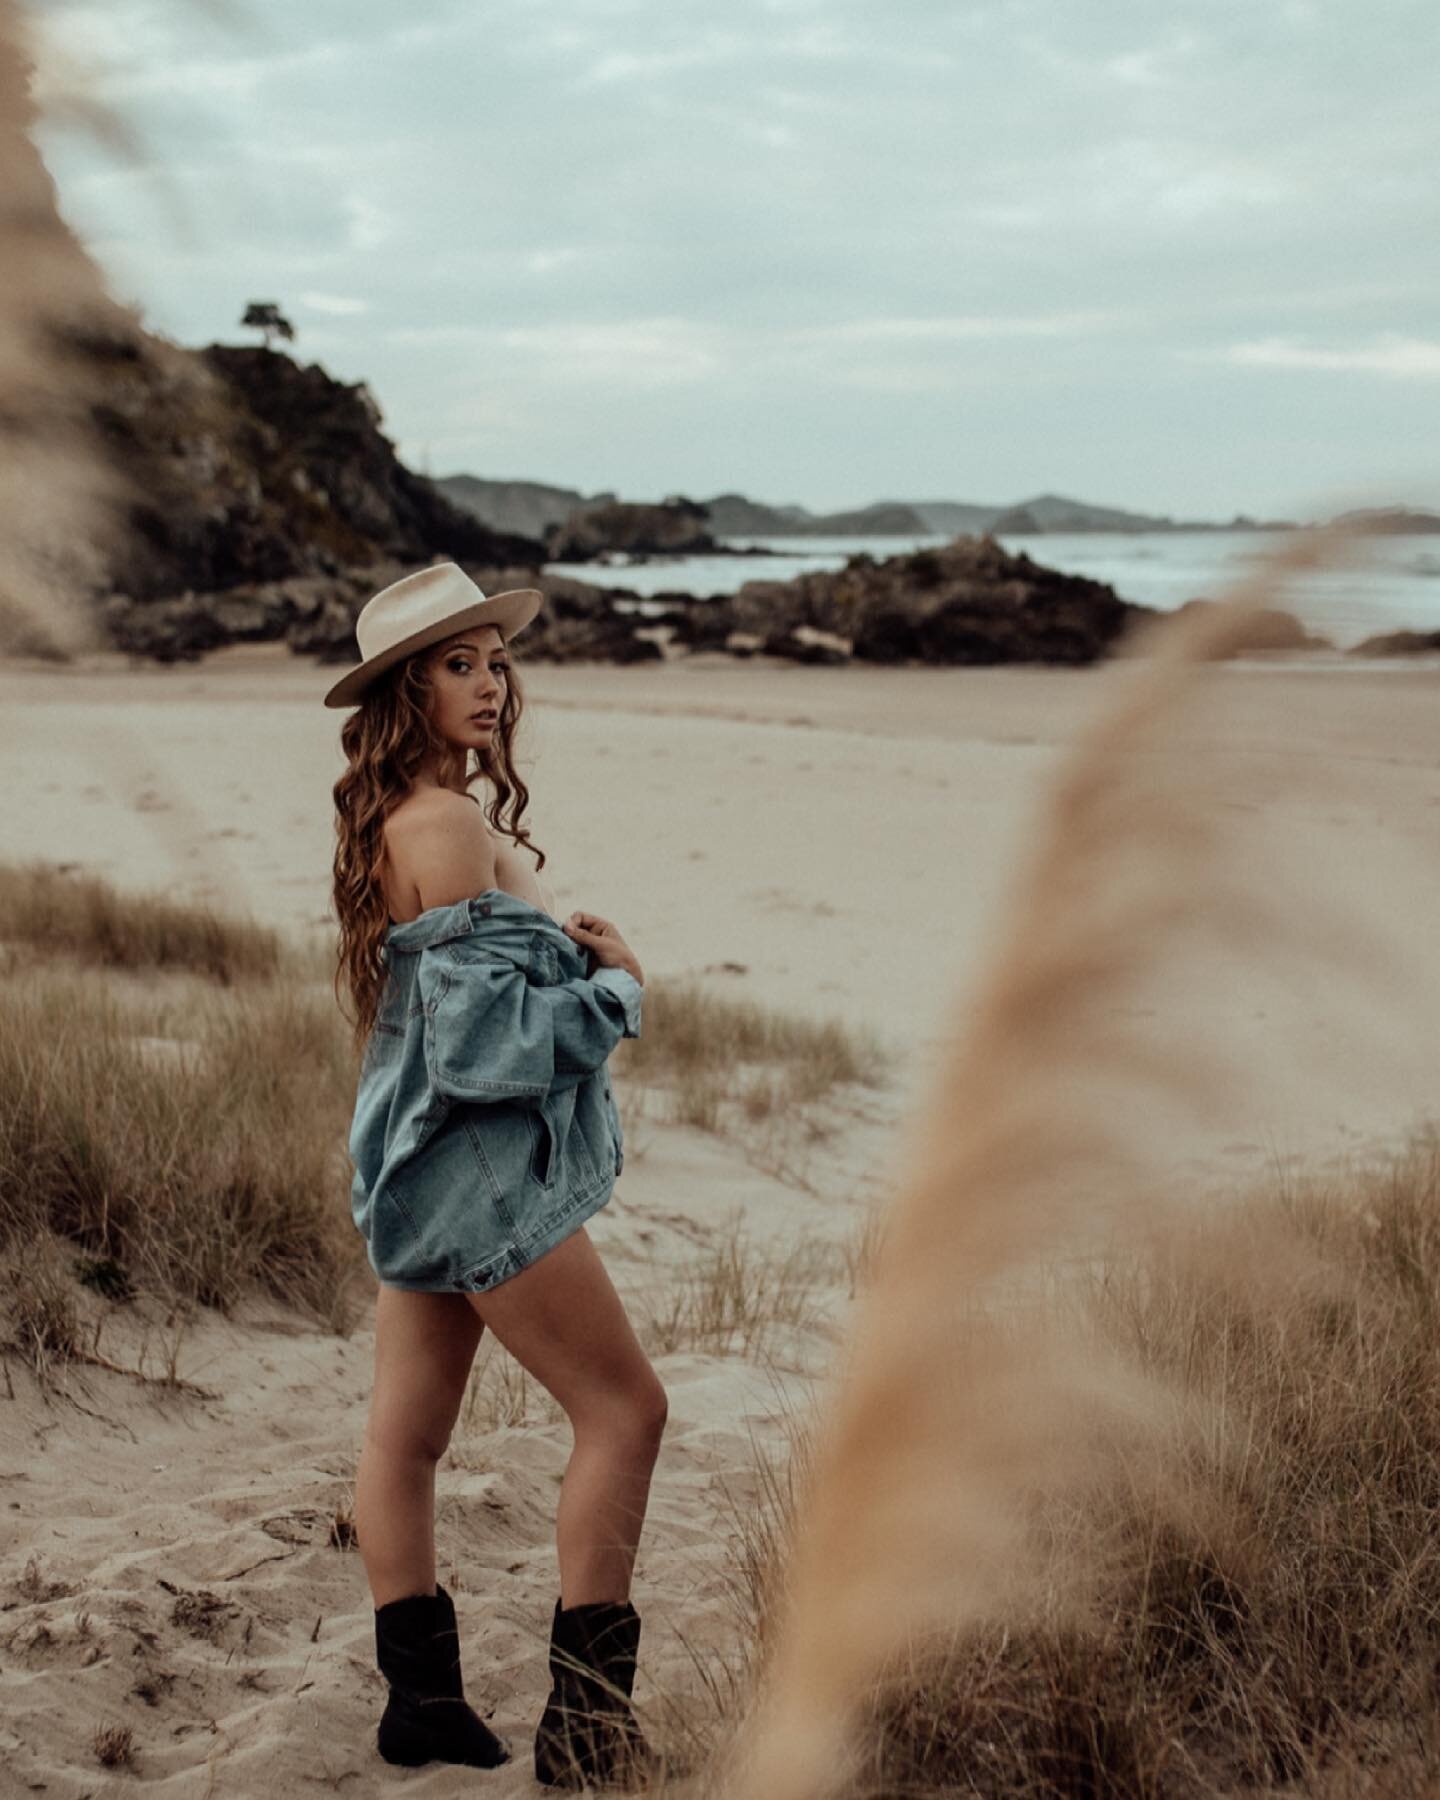 Part 2 - Country gal meets the sea 👒👢🌊

Model: @aaliyahfountain 
Make up: @katyjanemakeupartist 
Hair: @phillipas_hair_care 
Photography and styling by myself 
&bull;
&bull;
&bull;
&bull;
&bull;
&bull;
&bull;
#womenempowerment #empoweringwomen #st